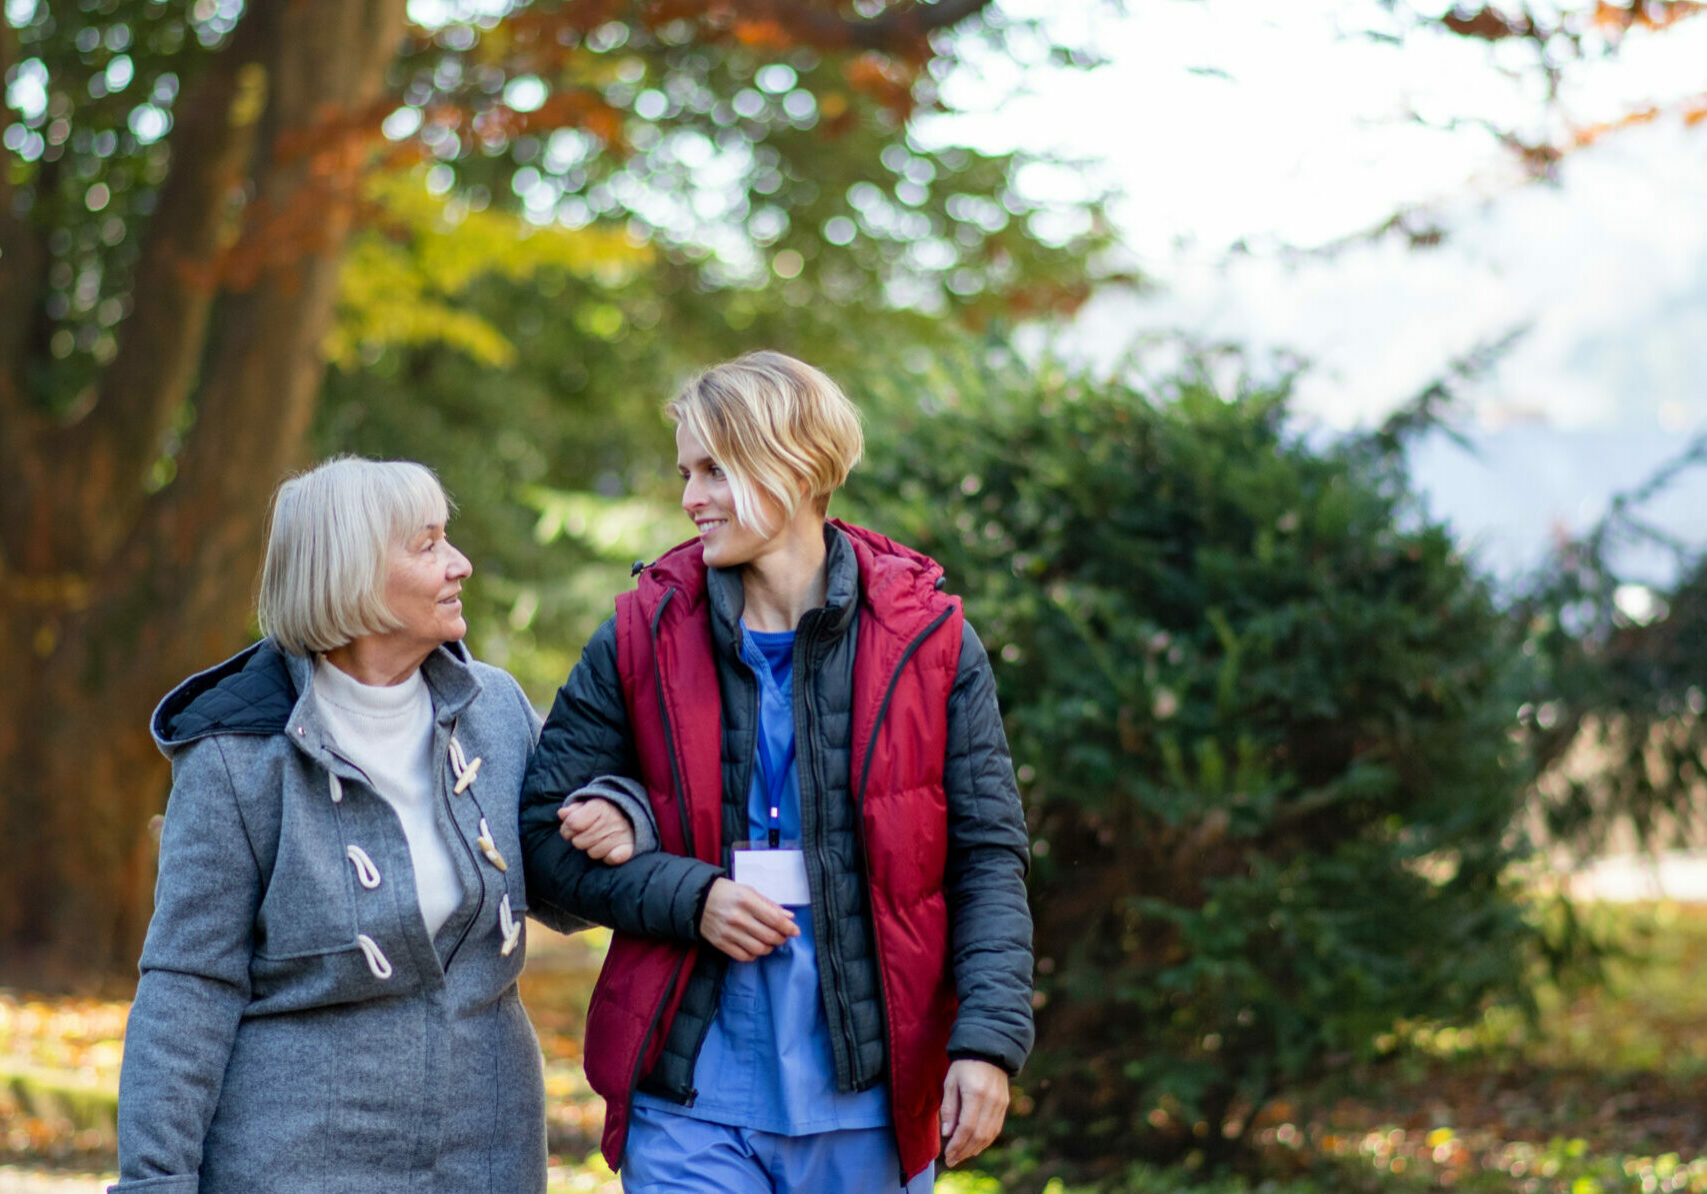 Front view of senior woman and caregiver outdoors on a walk in park, talking.